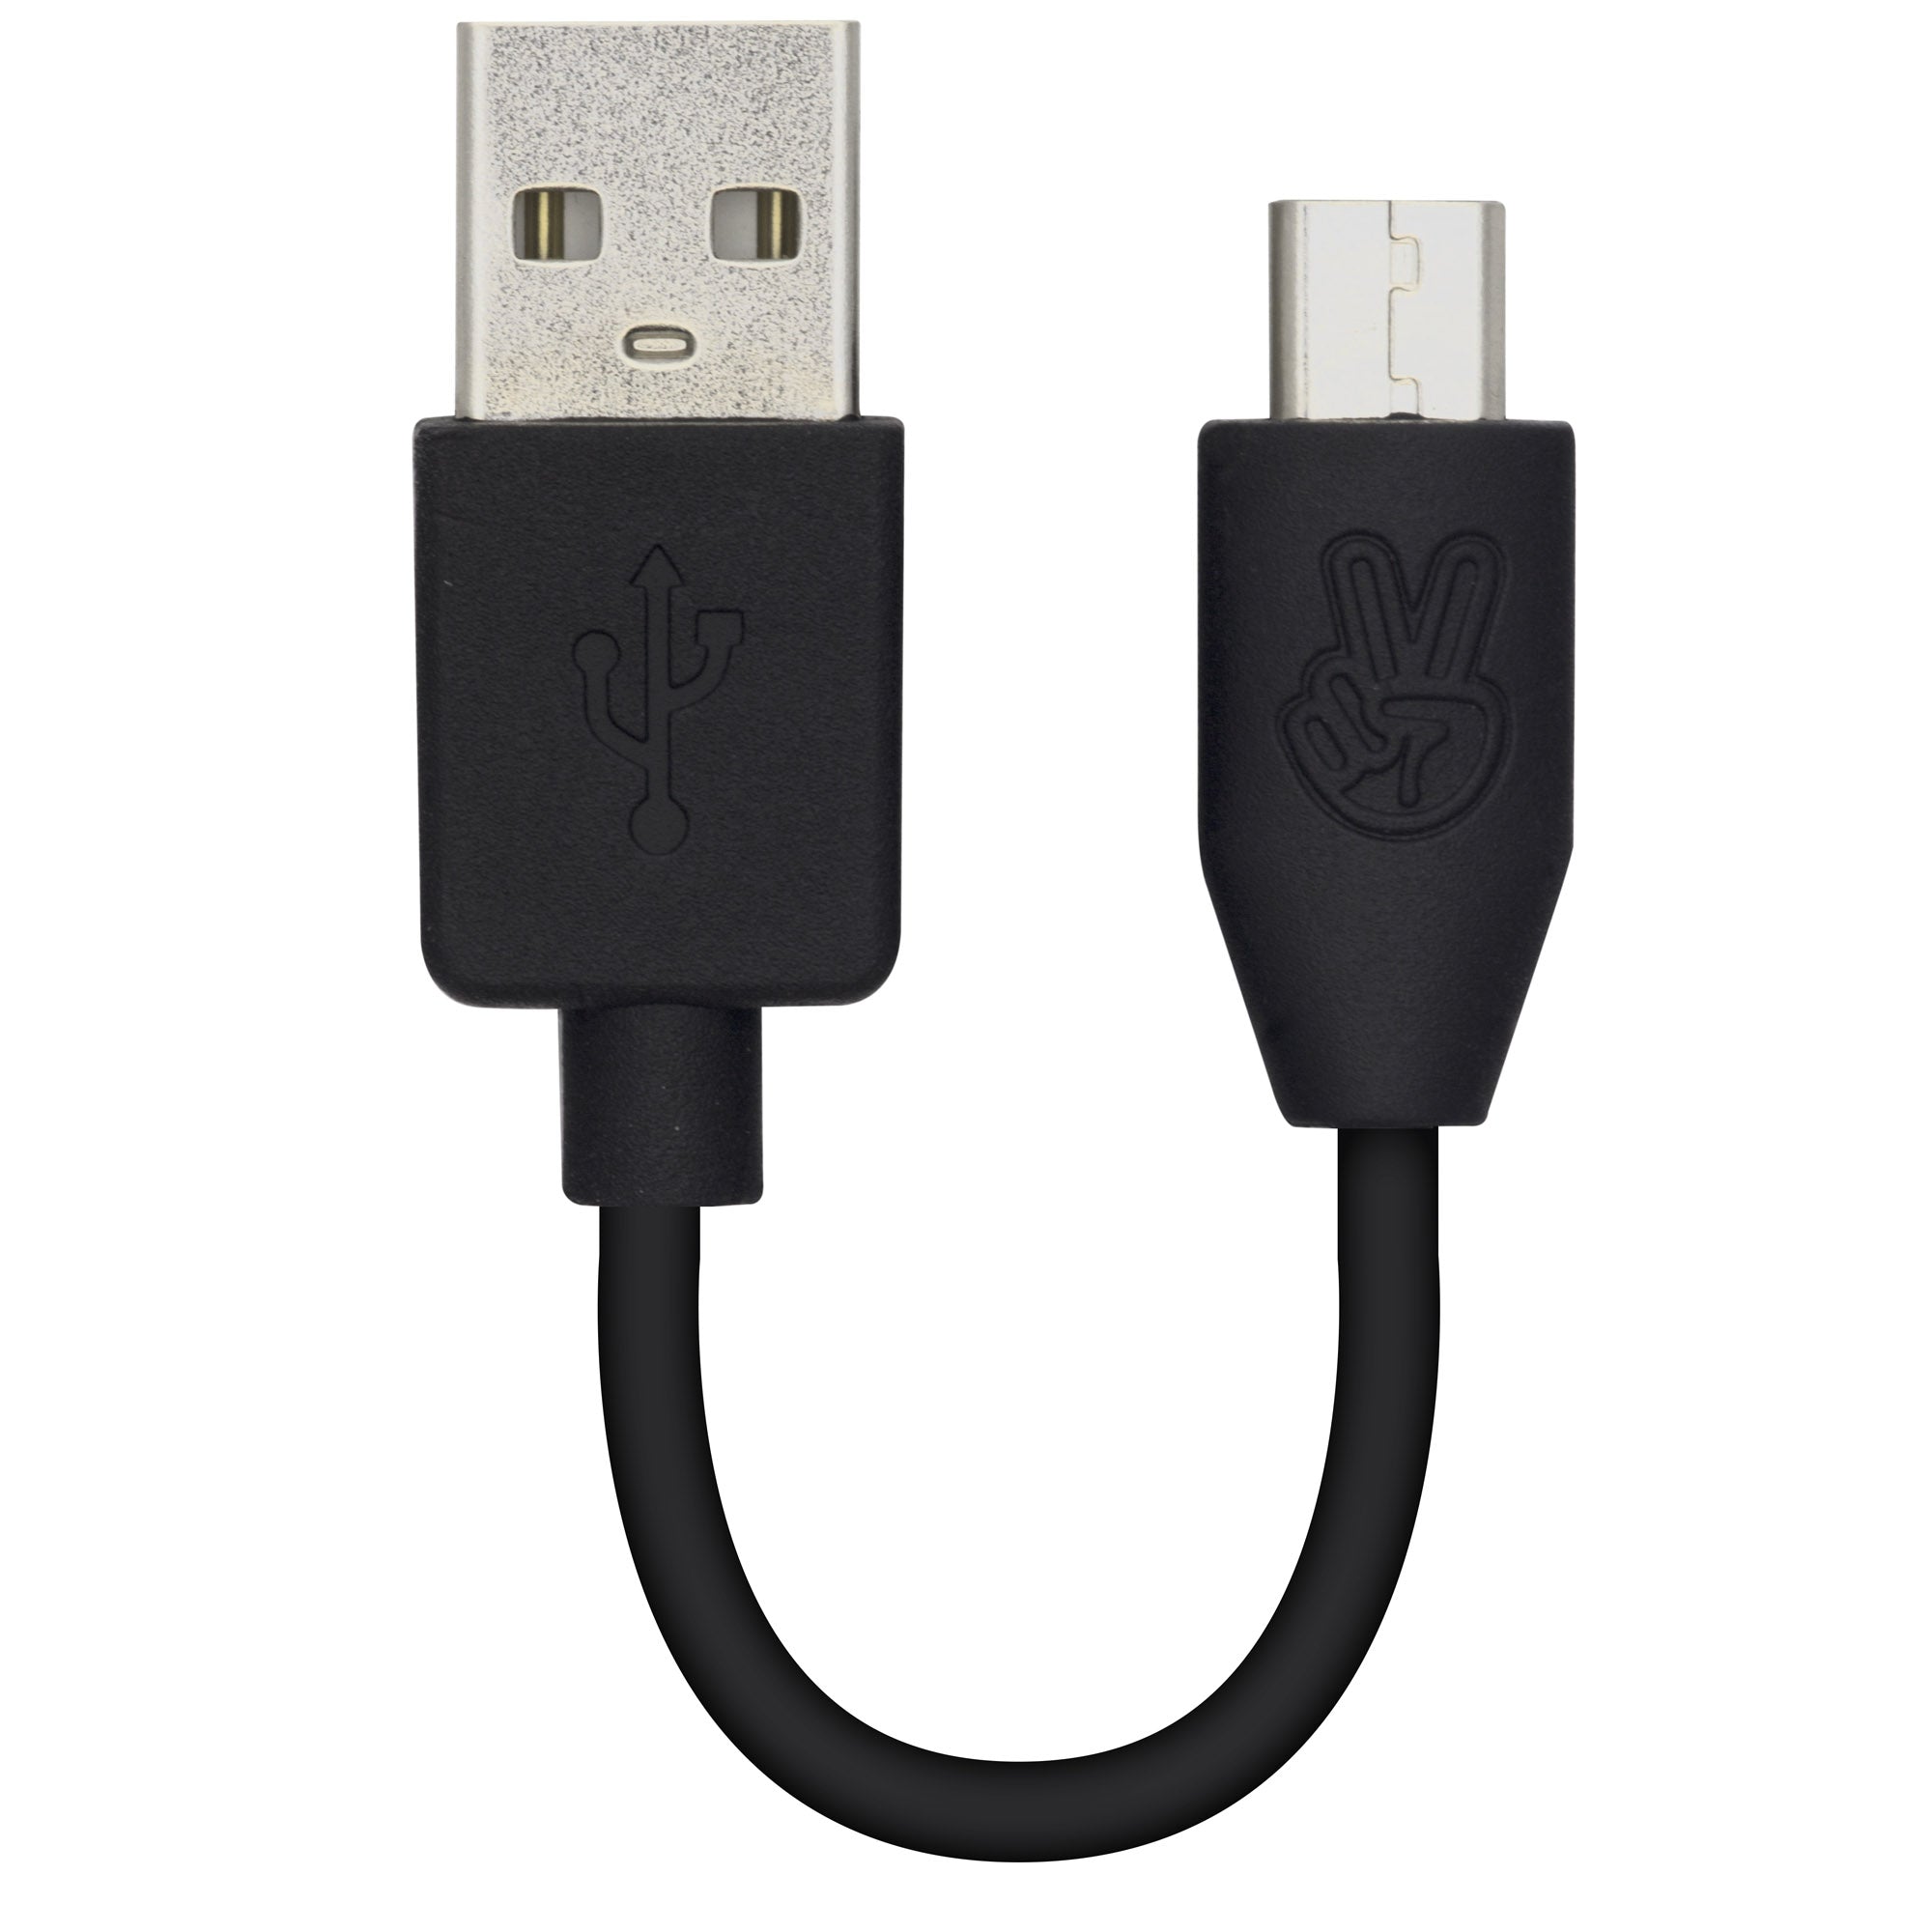 MicroUSB Sync'n'charge Cable